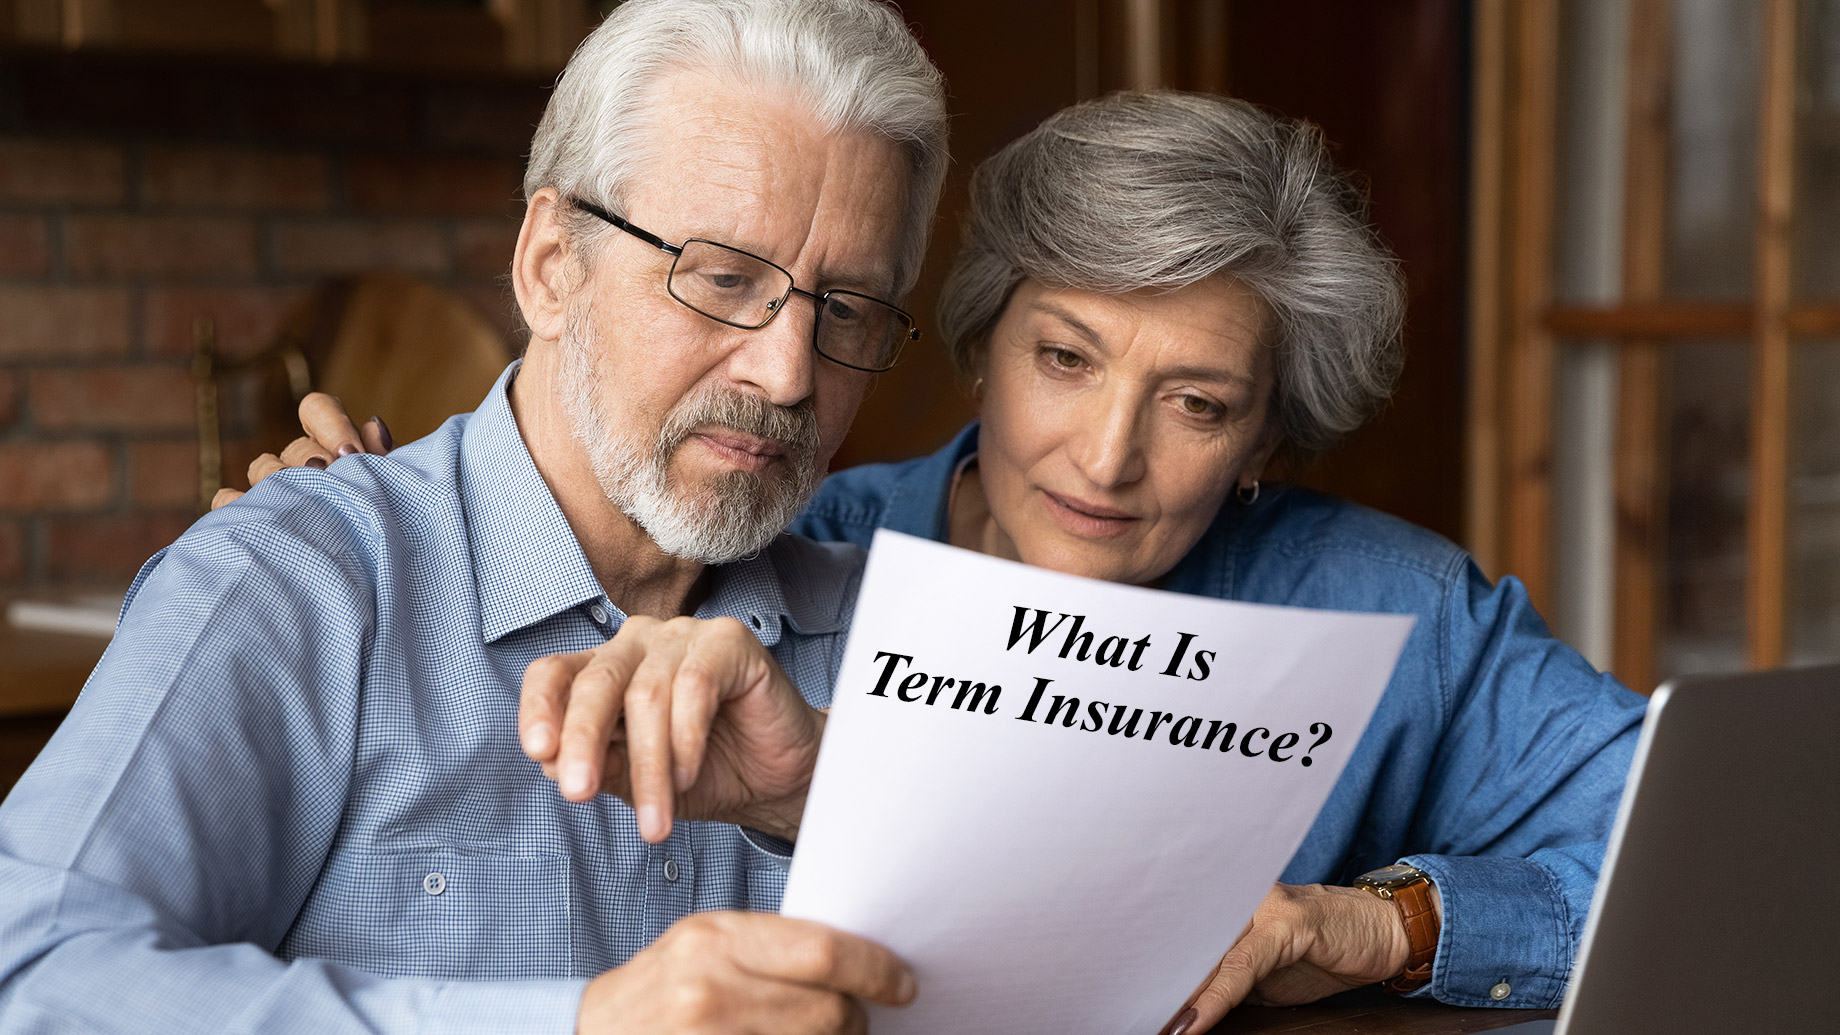 What Is Term Insurance?